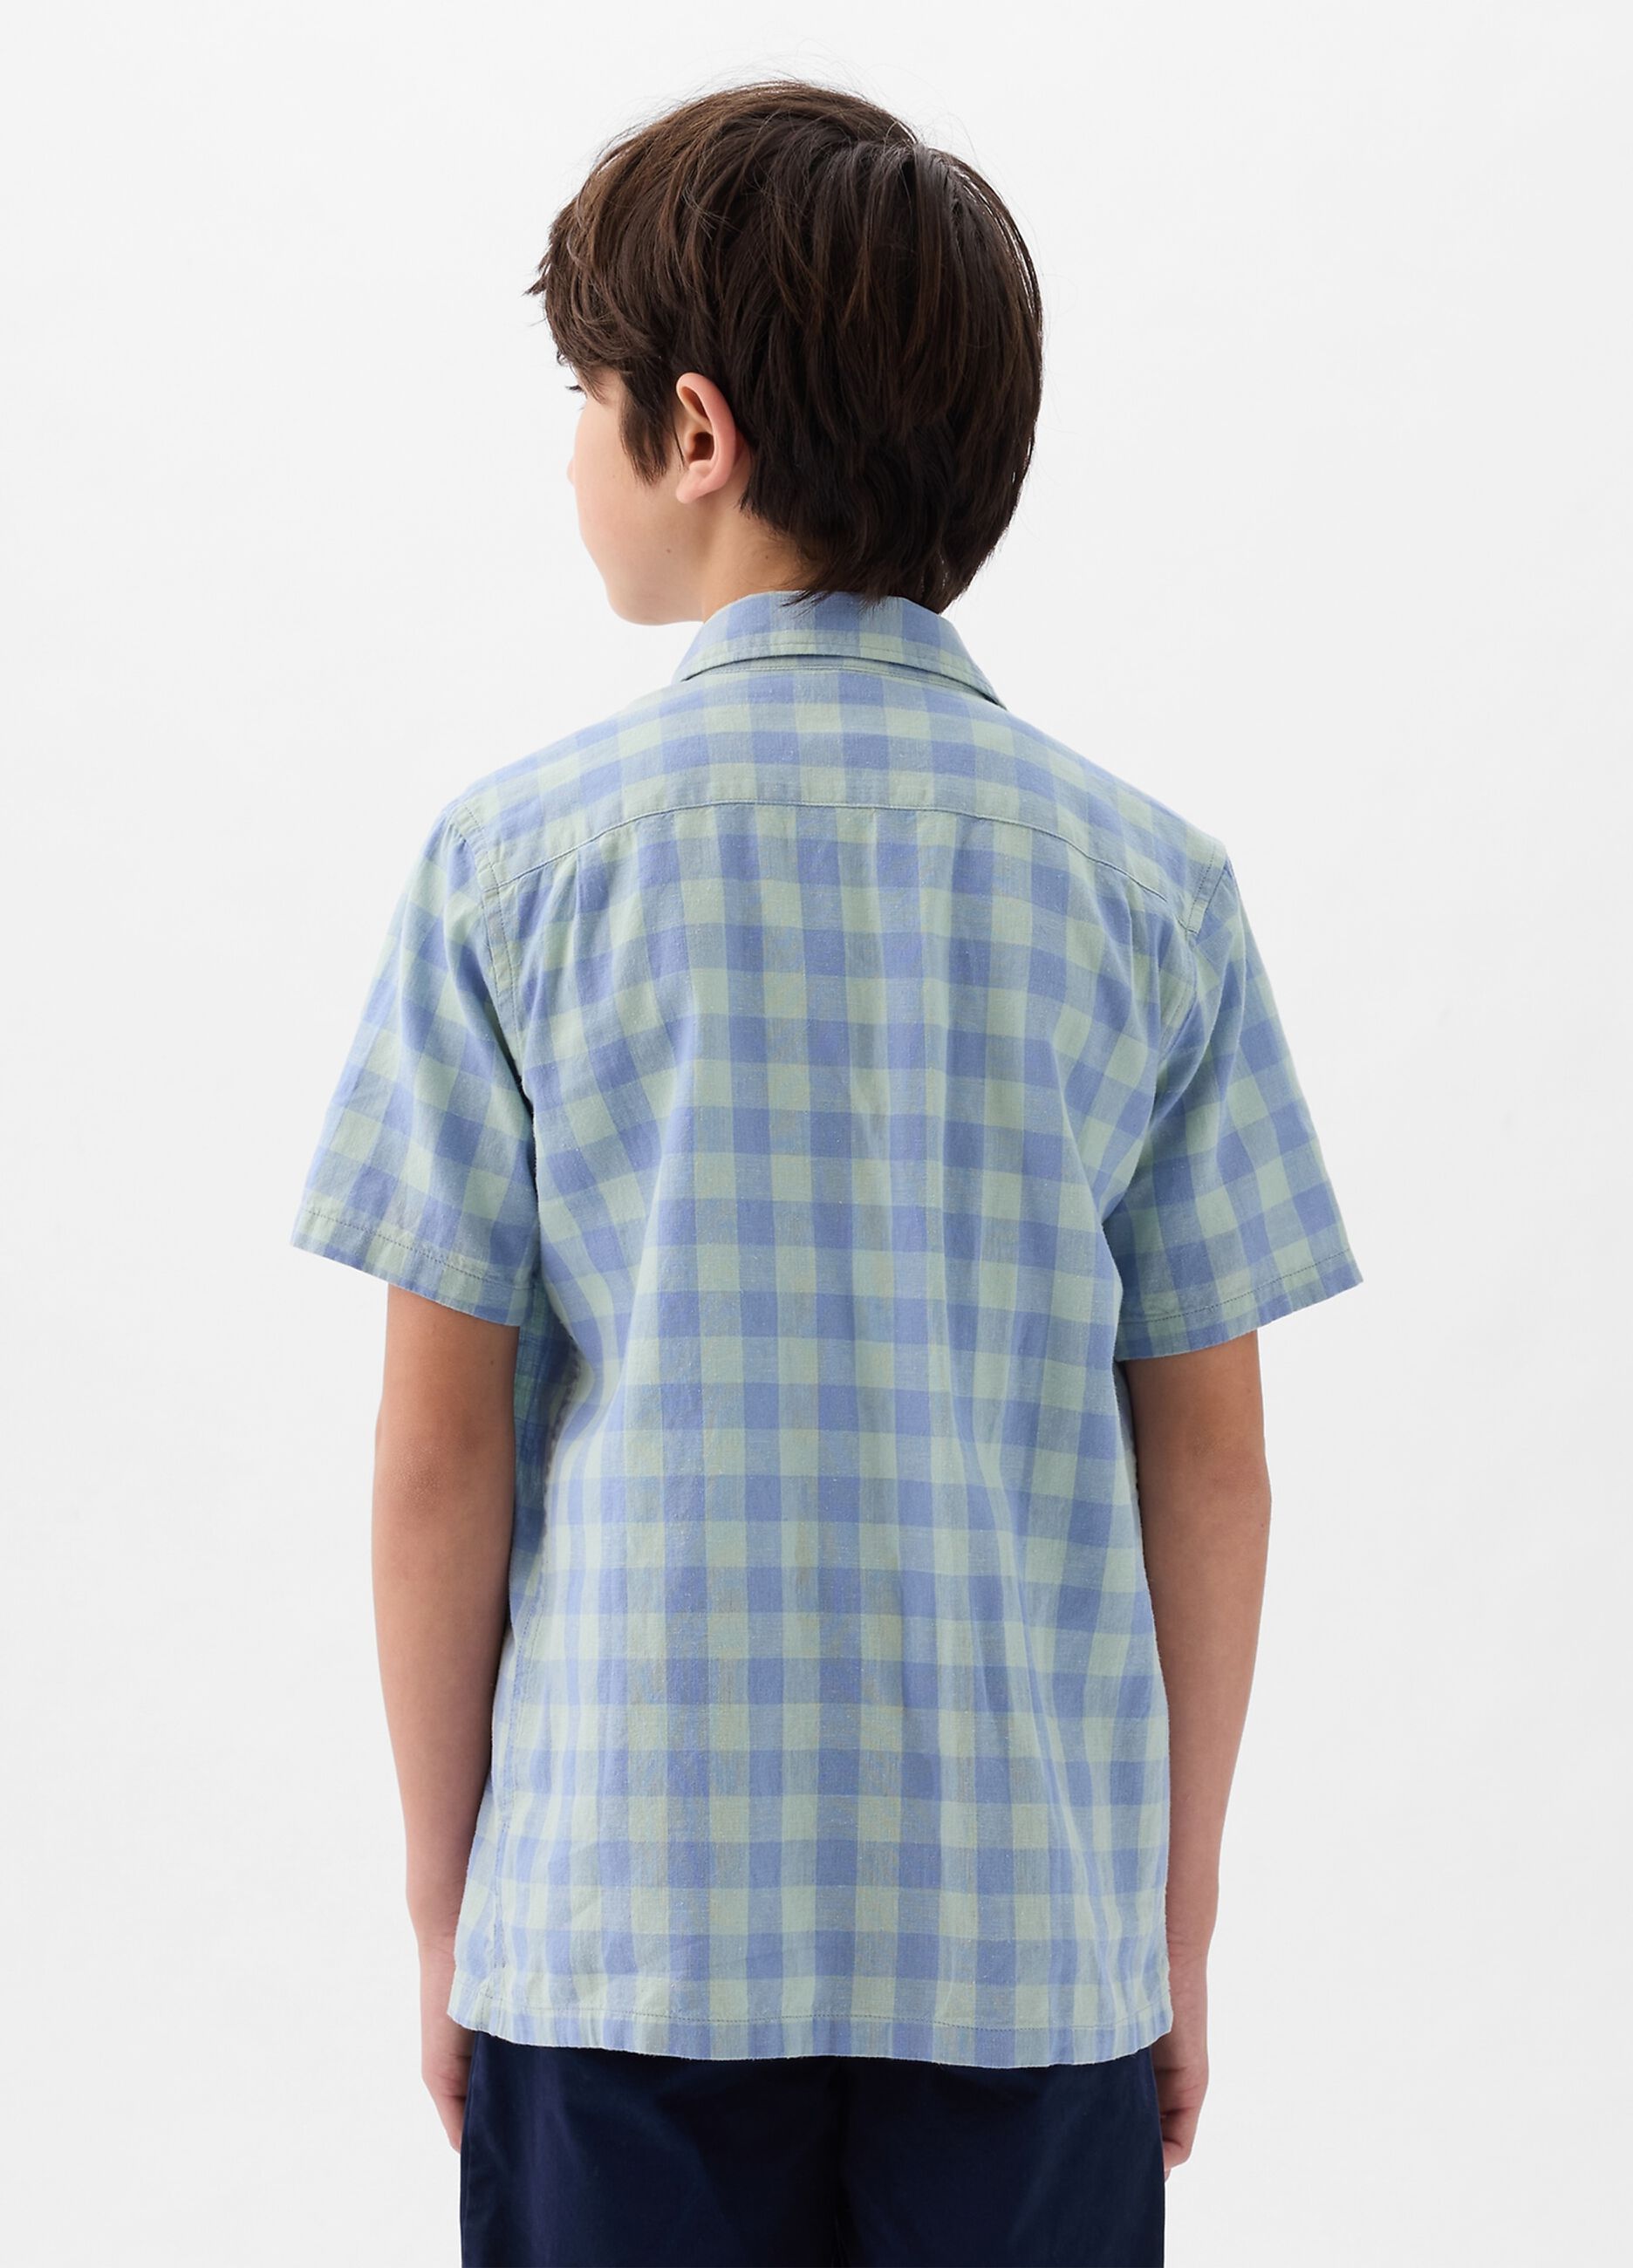 Linen and viscose shirt with short sleeves